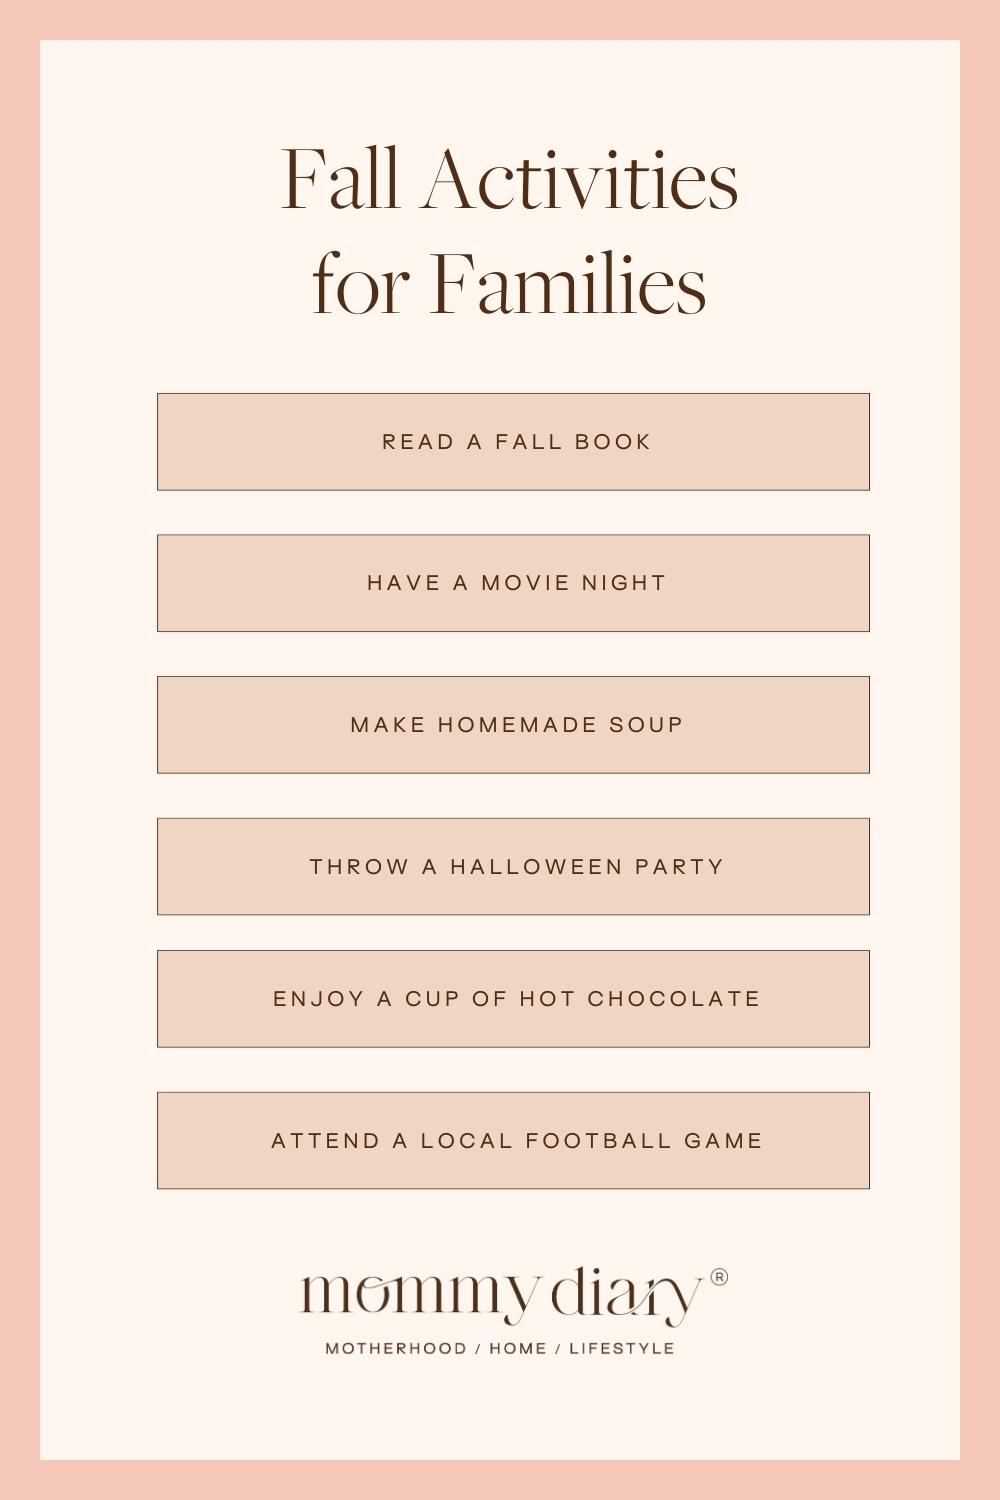 Fall Activities for Families List 2